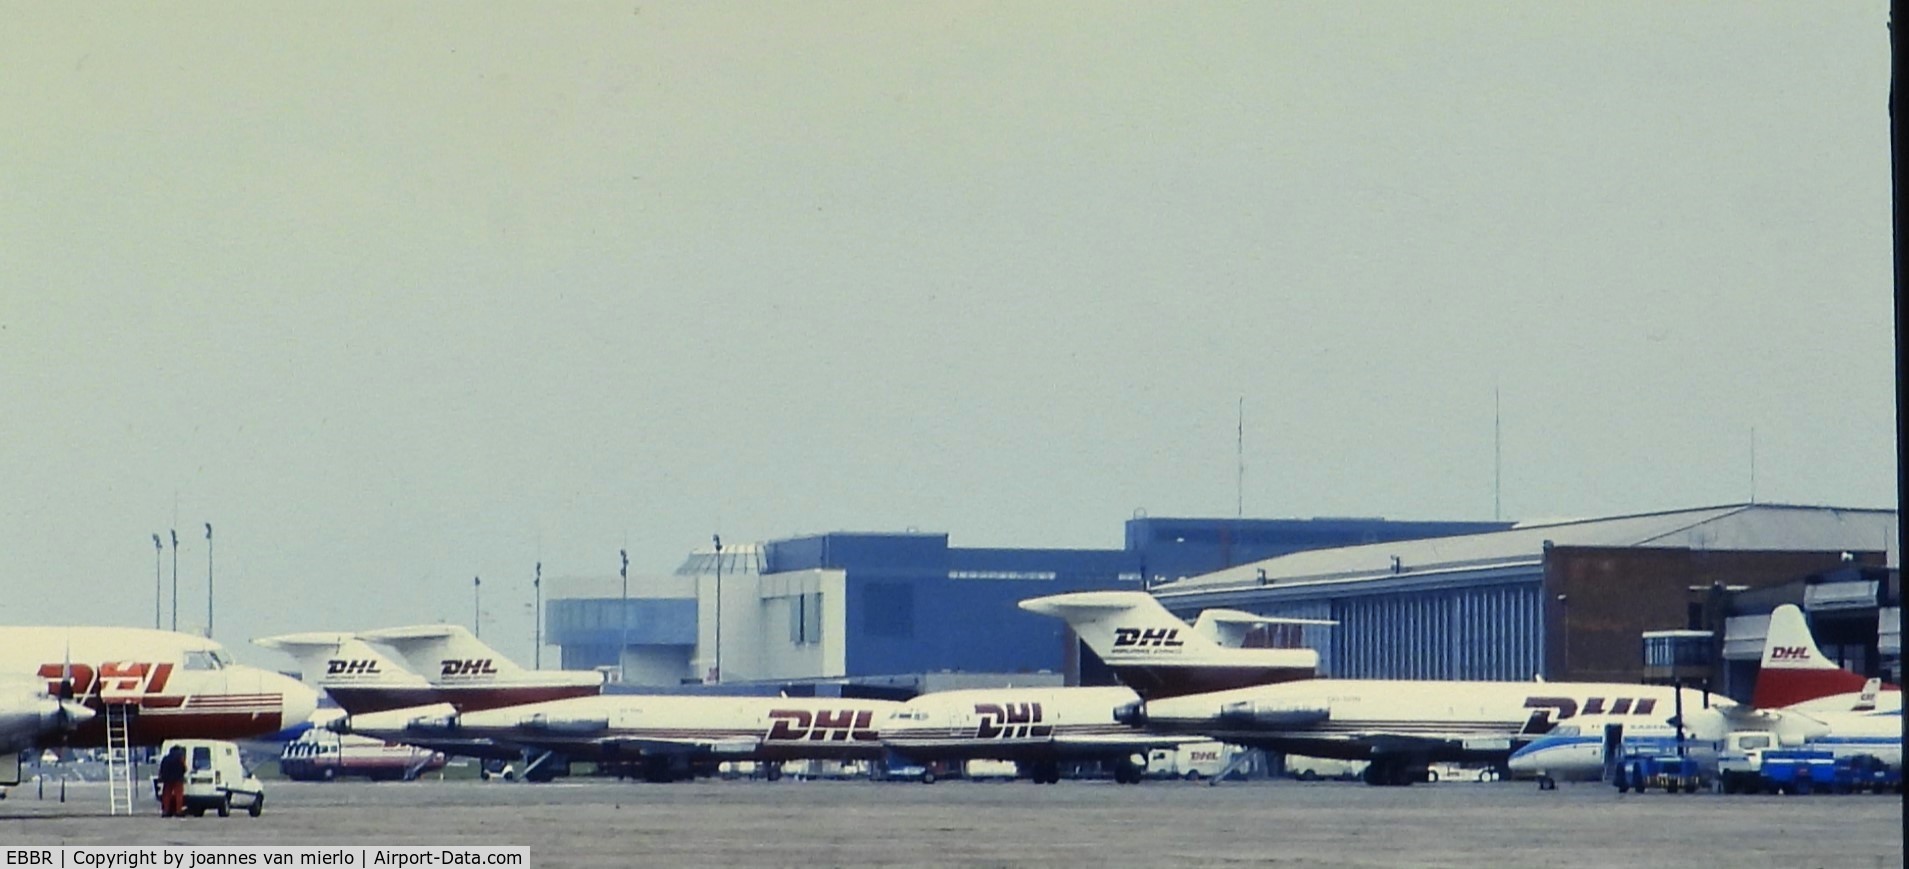 Brussels Airport, Brussels / Zaventem   Belgium (EBBR) - Brussels' DHL hub scenery on a sunday afternoon early 90s ex-slide